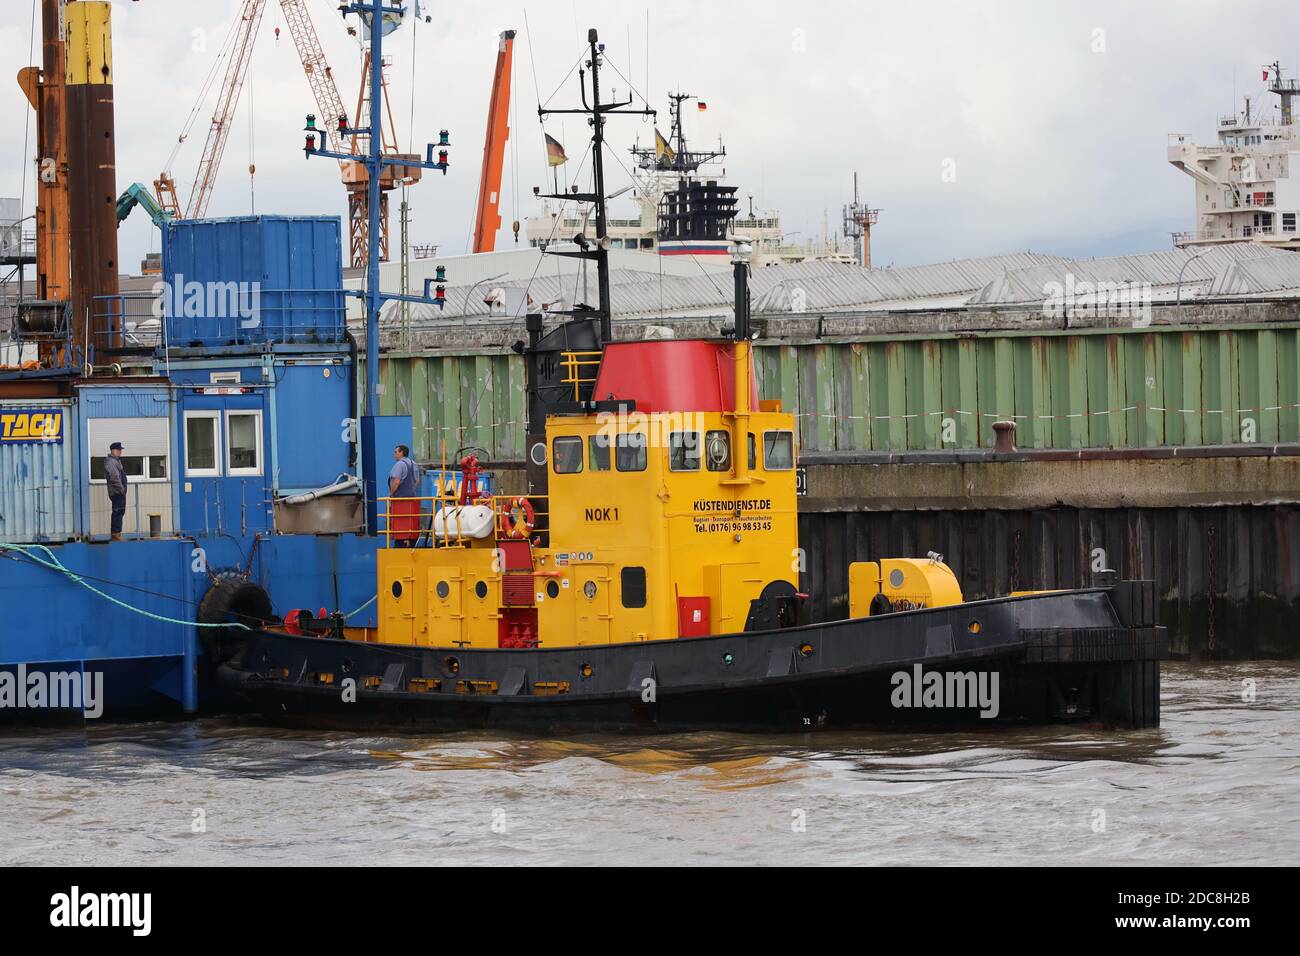 The small tug NOK 1 will be working in the port of Bremerhaven on August 24, 2020. Stock Photo